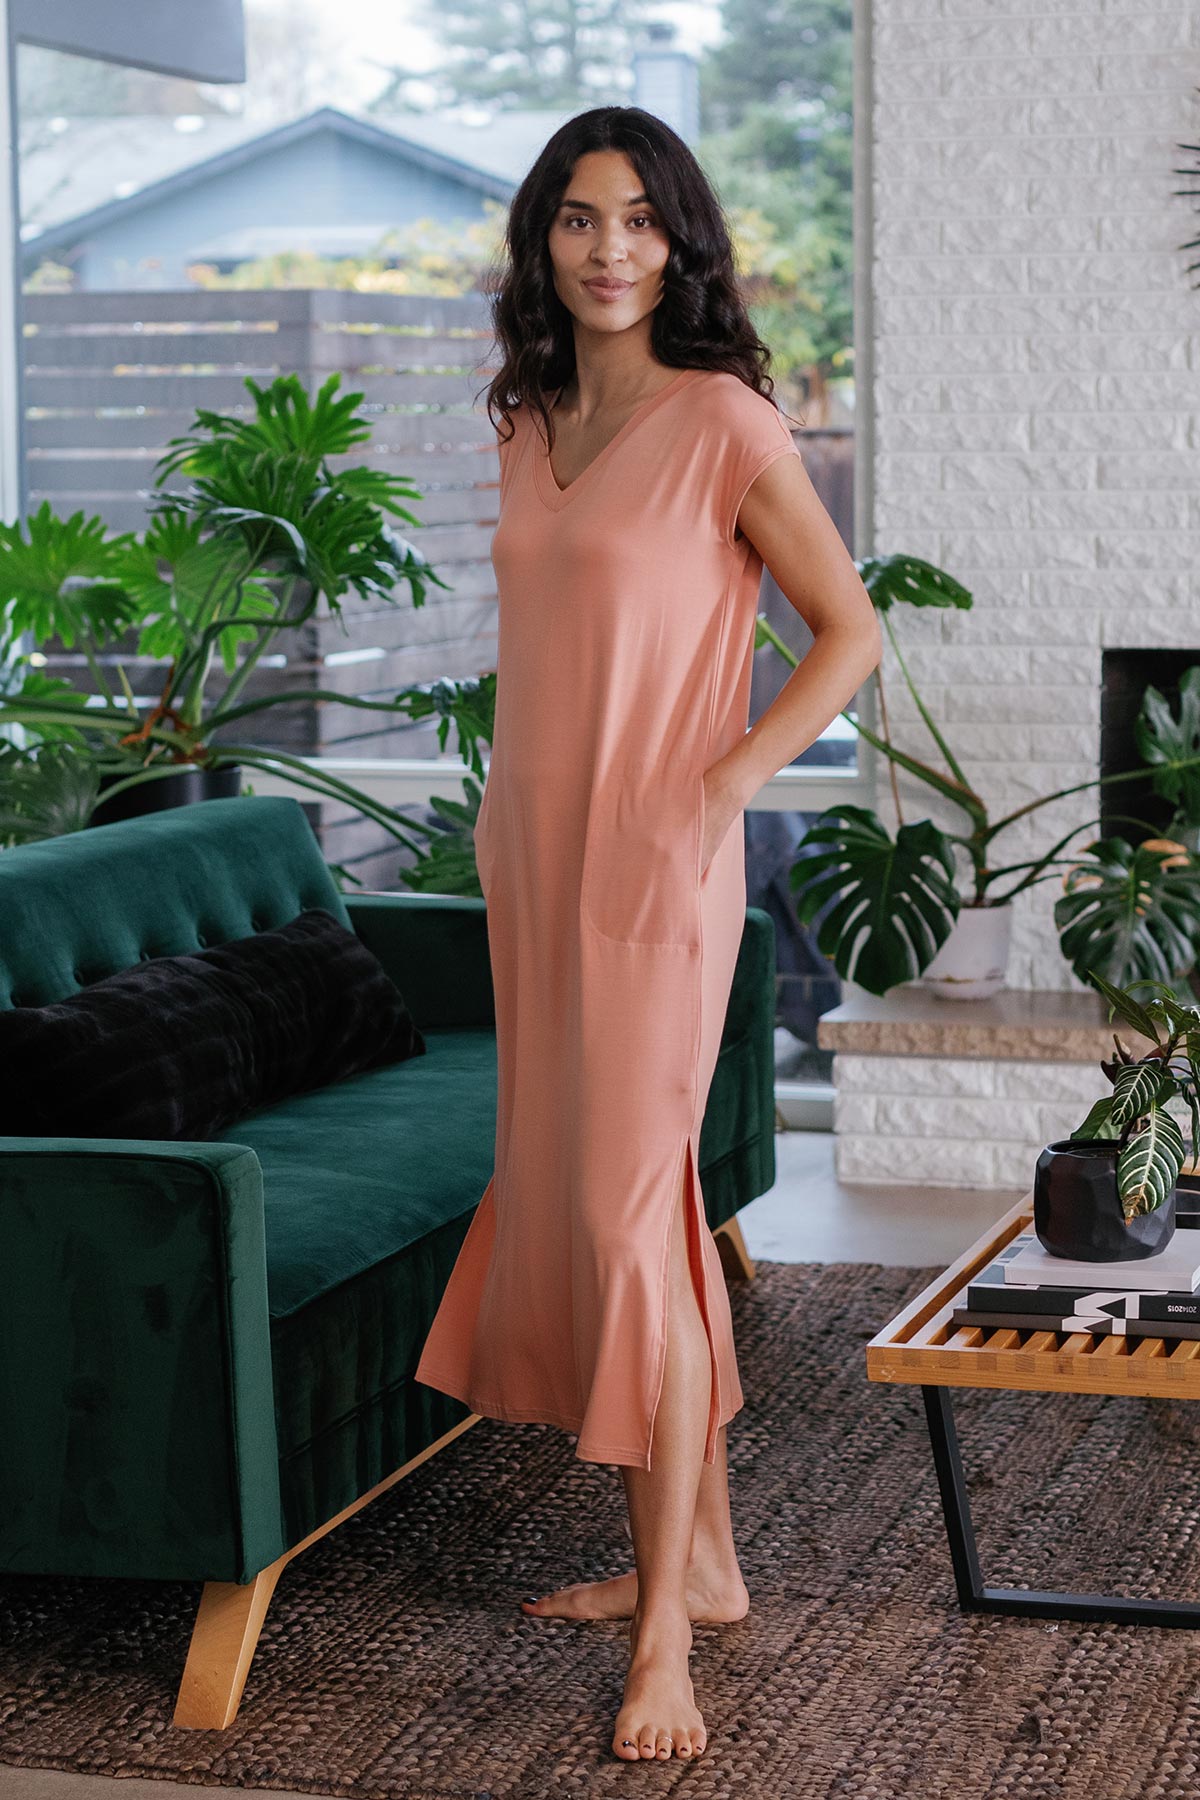 A woman standing with both hands in her pockets, wearing Yala Sloane V-Neck Cap Sleeve Bamboo Maxi Dress in Apricot